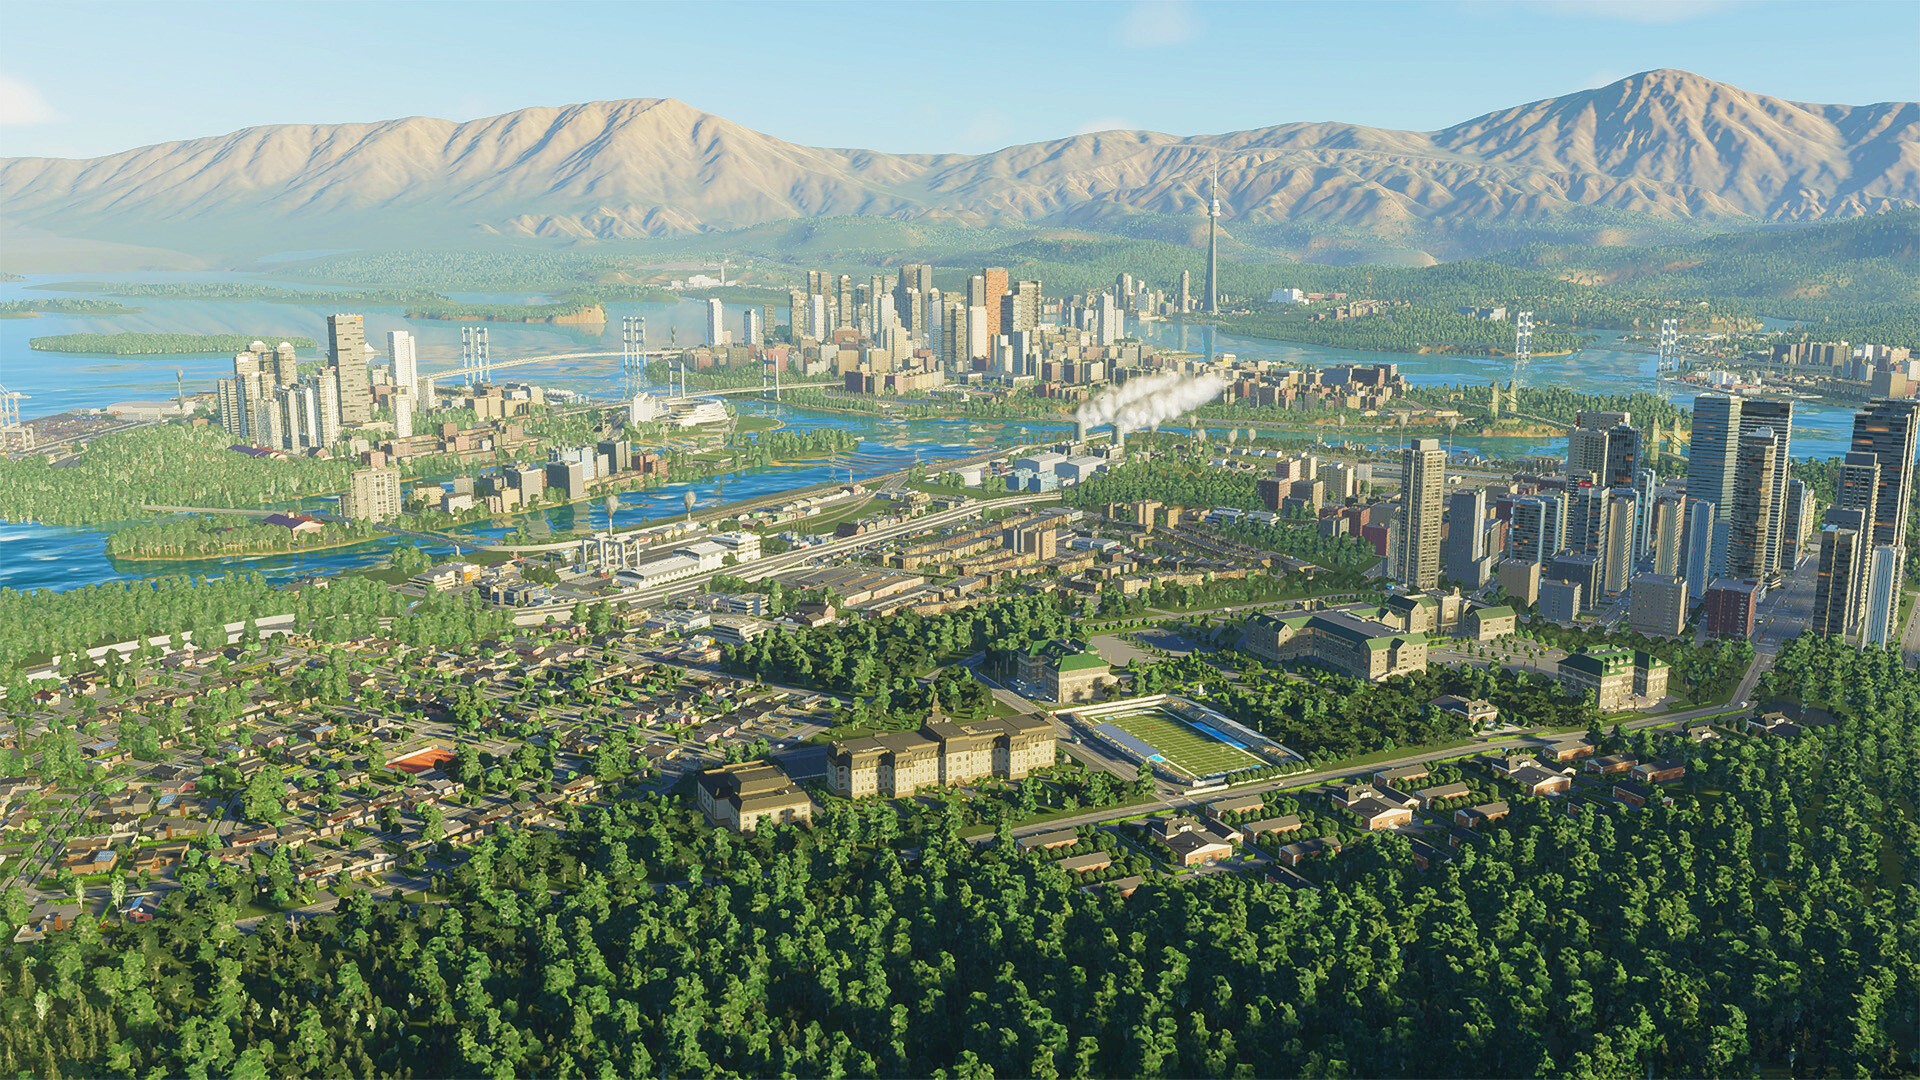 Cities: Skylines 2's huge maps blew me away with their sheer size and scale